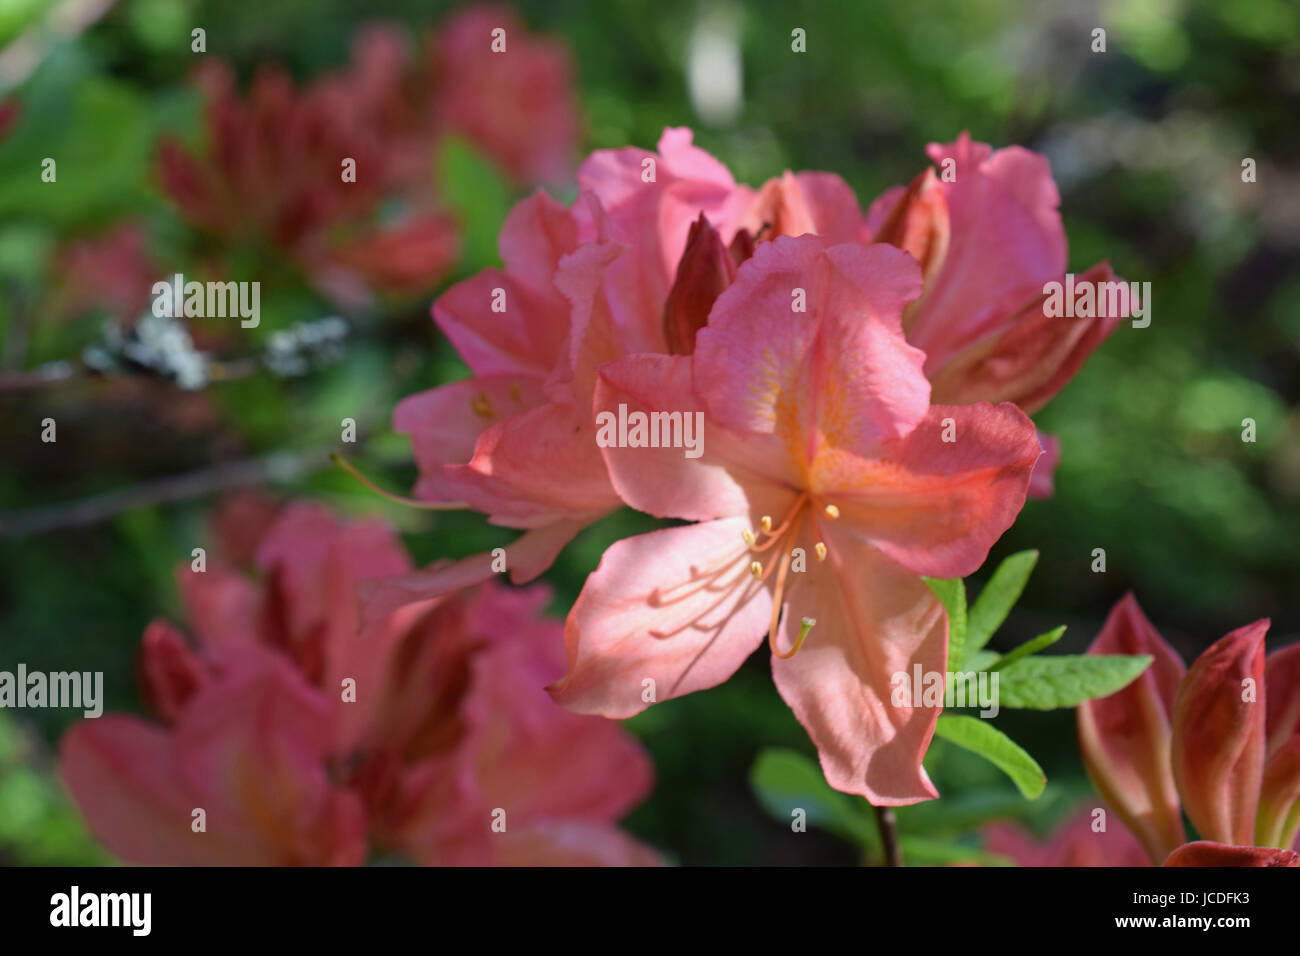 Rhododendron molle japonicum, beautiful pink flowers Stock Photo